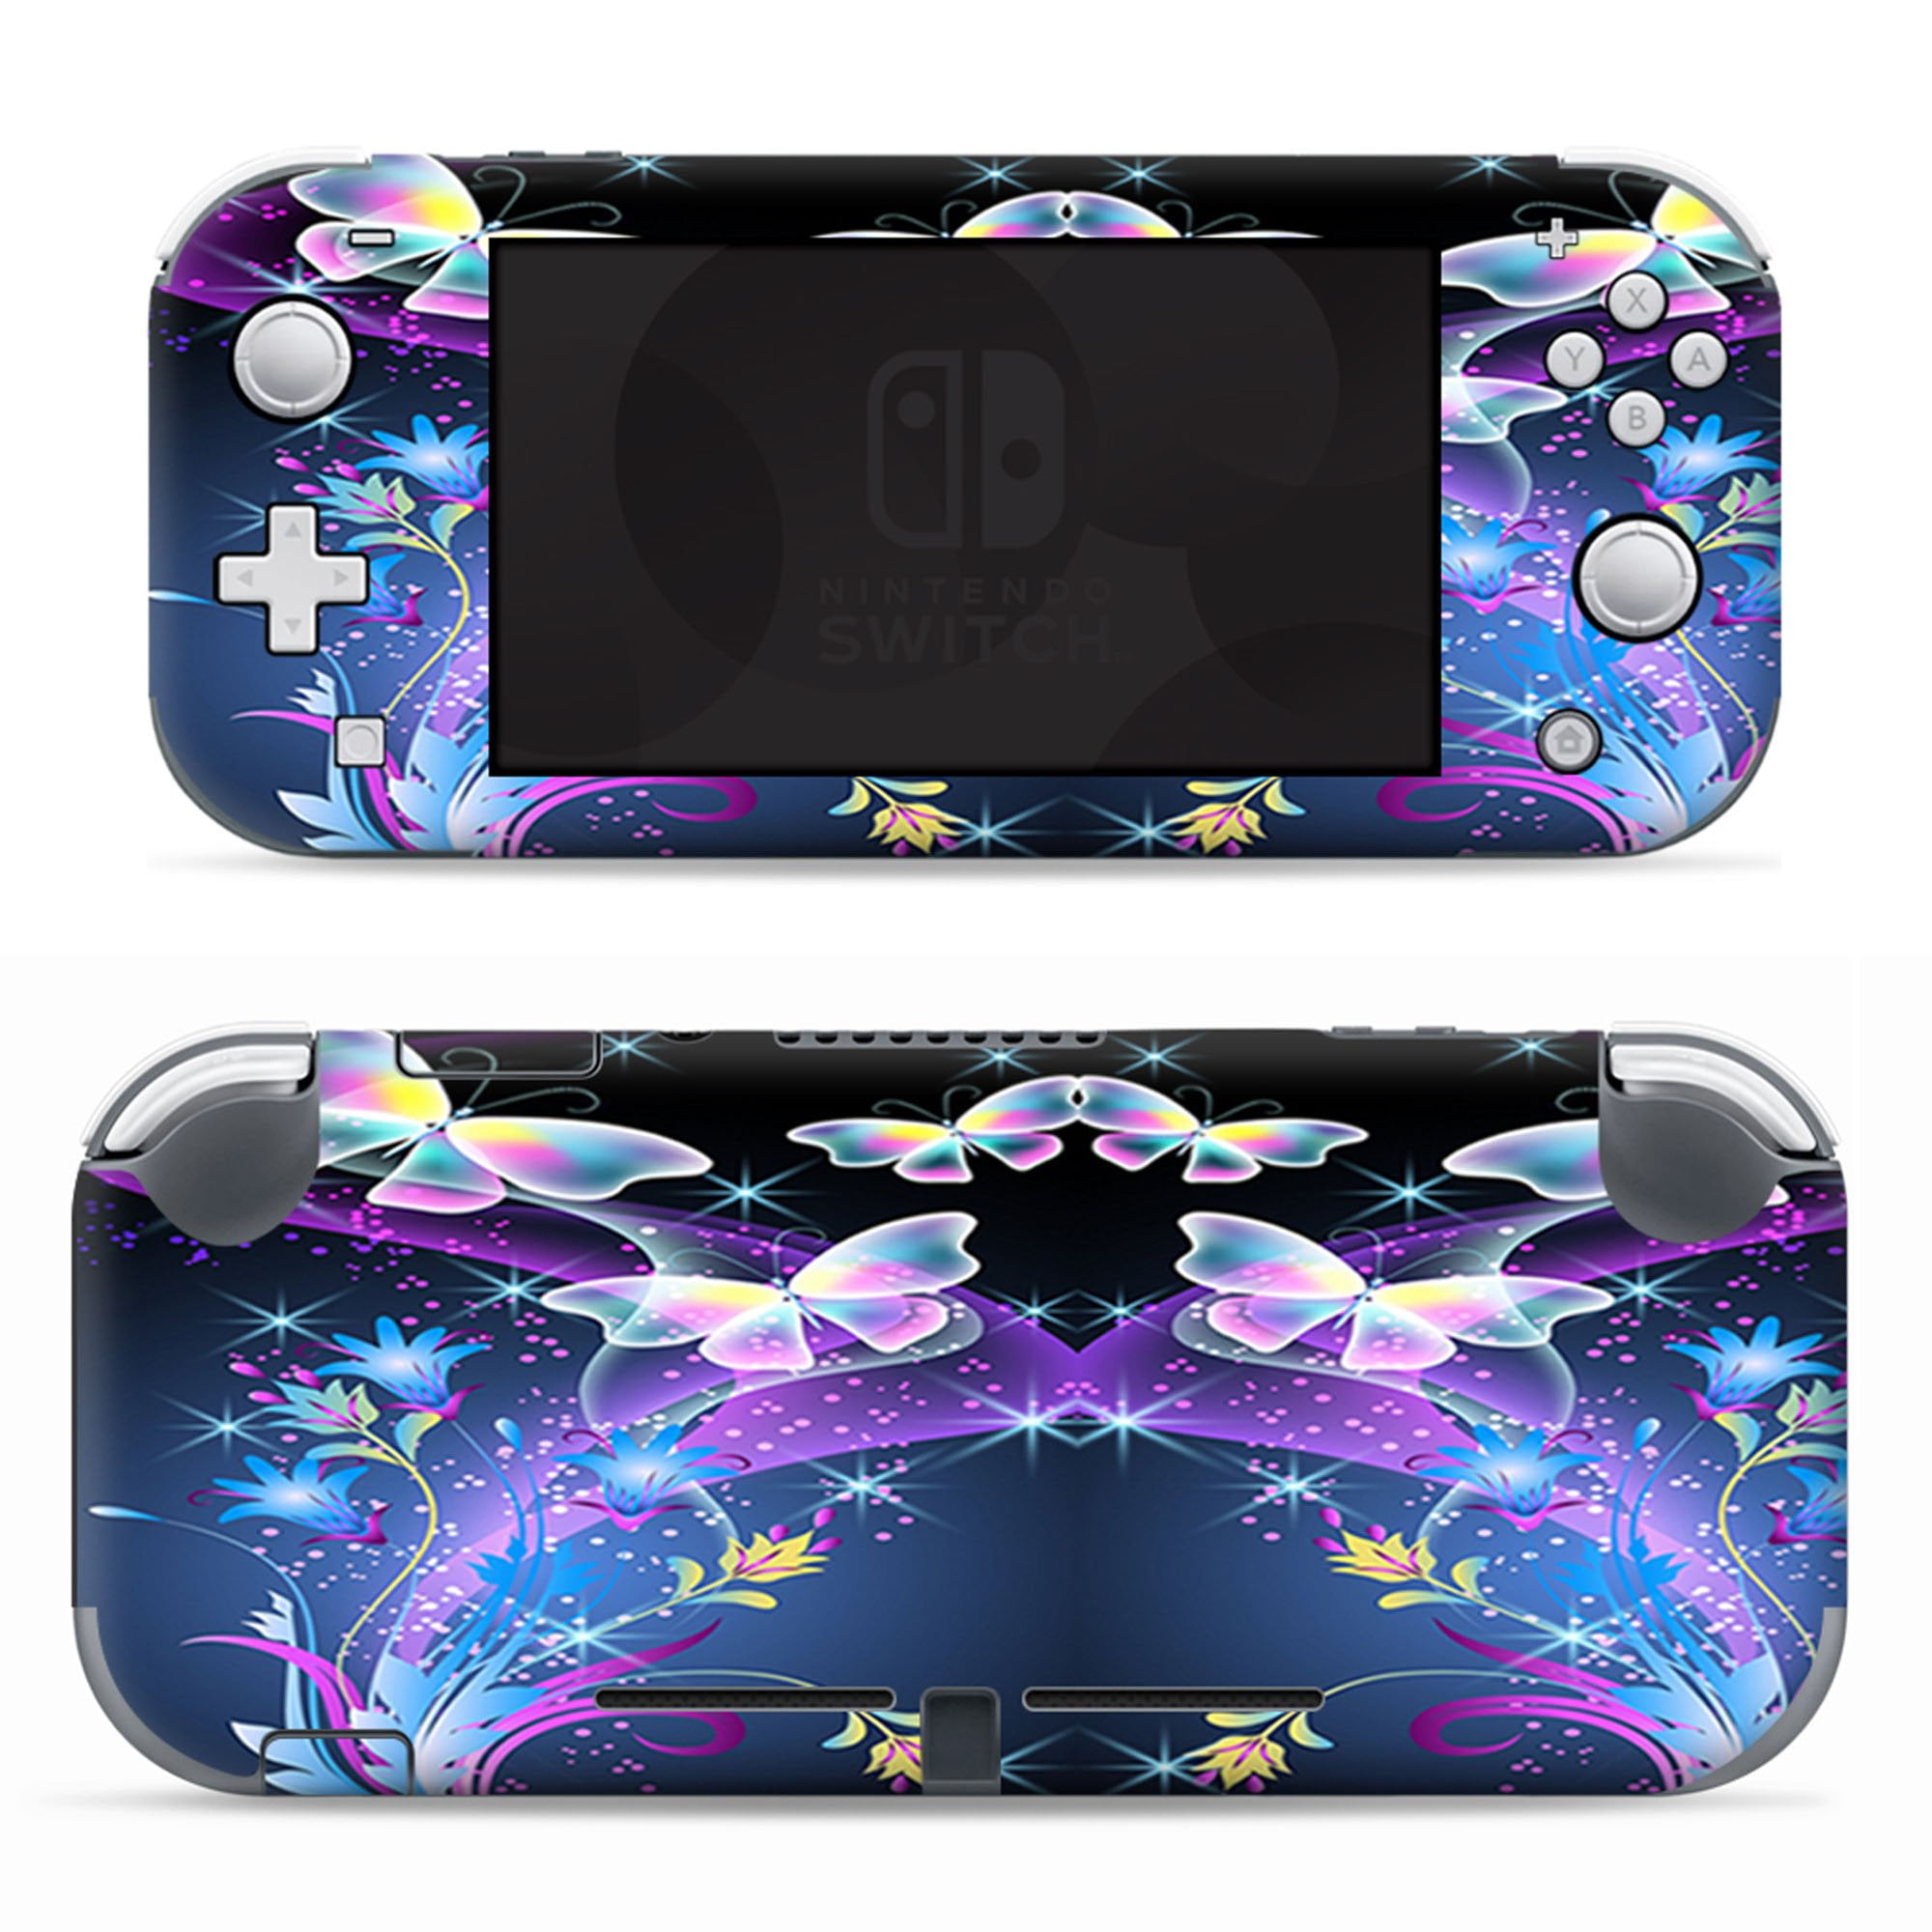 Nintendo Switch Lite Skins Decals Vinyl Wrap decal stickers skins cover glowing butterflies